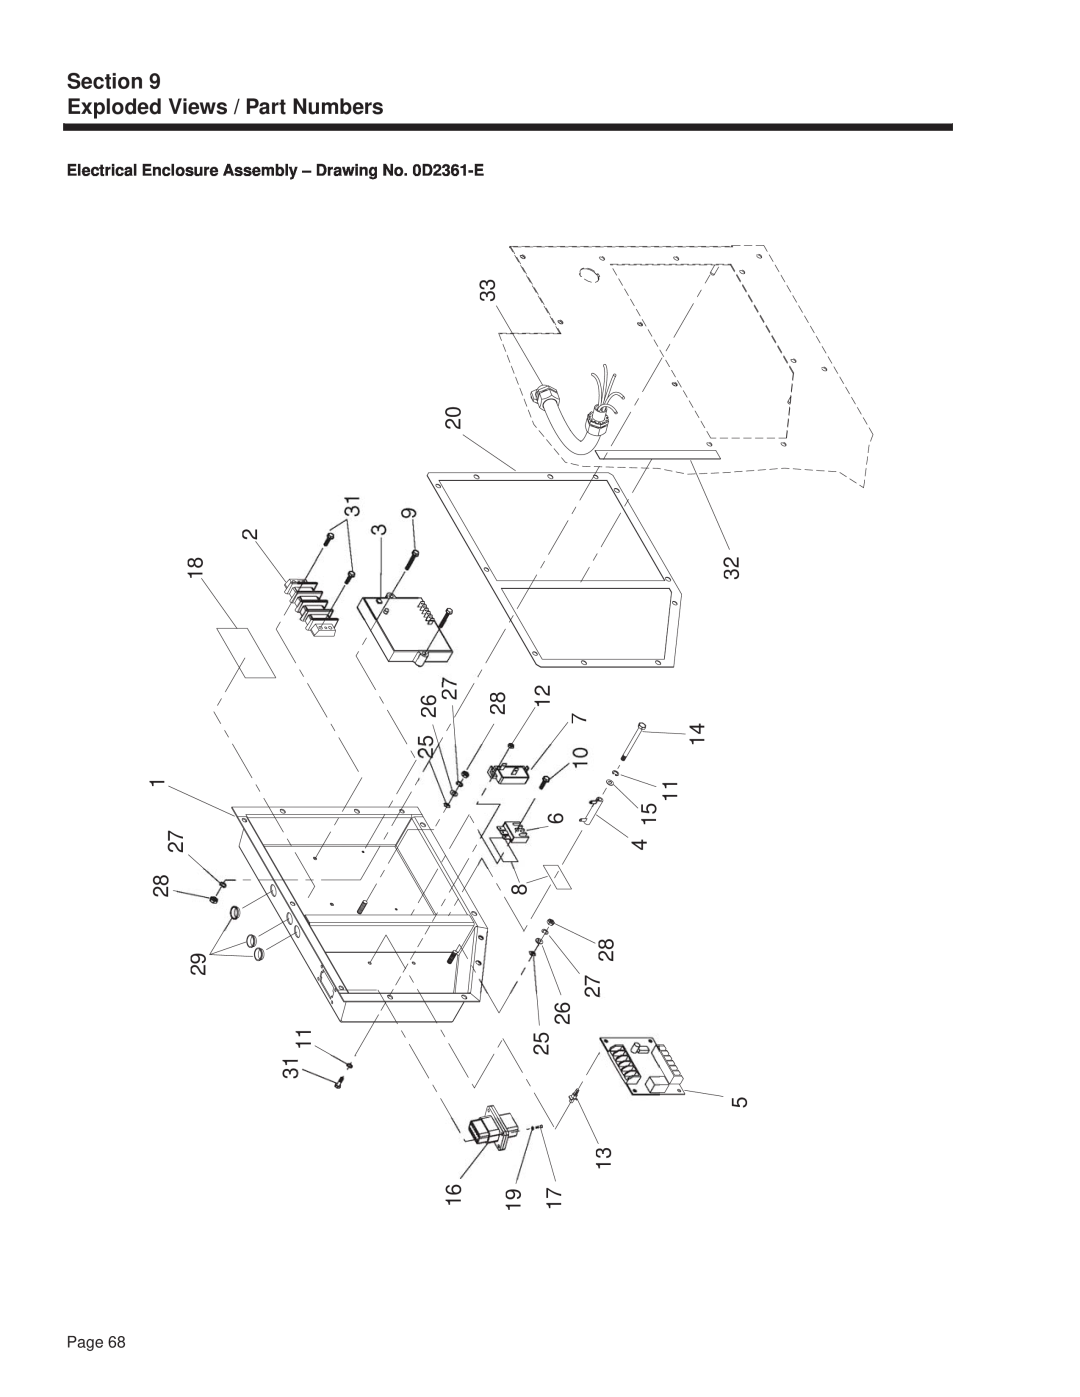 Guardian Technologies 4270 Section Exploded Views / Part Numbers, Electrical Enclosure Assembly - Drawing No. 0D2361-E 